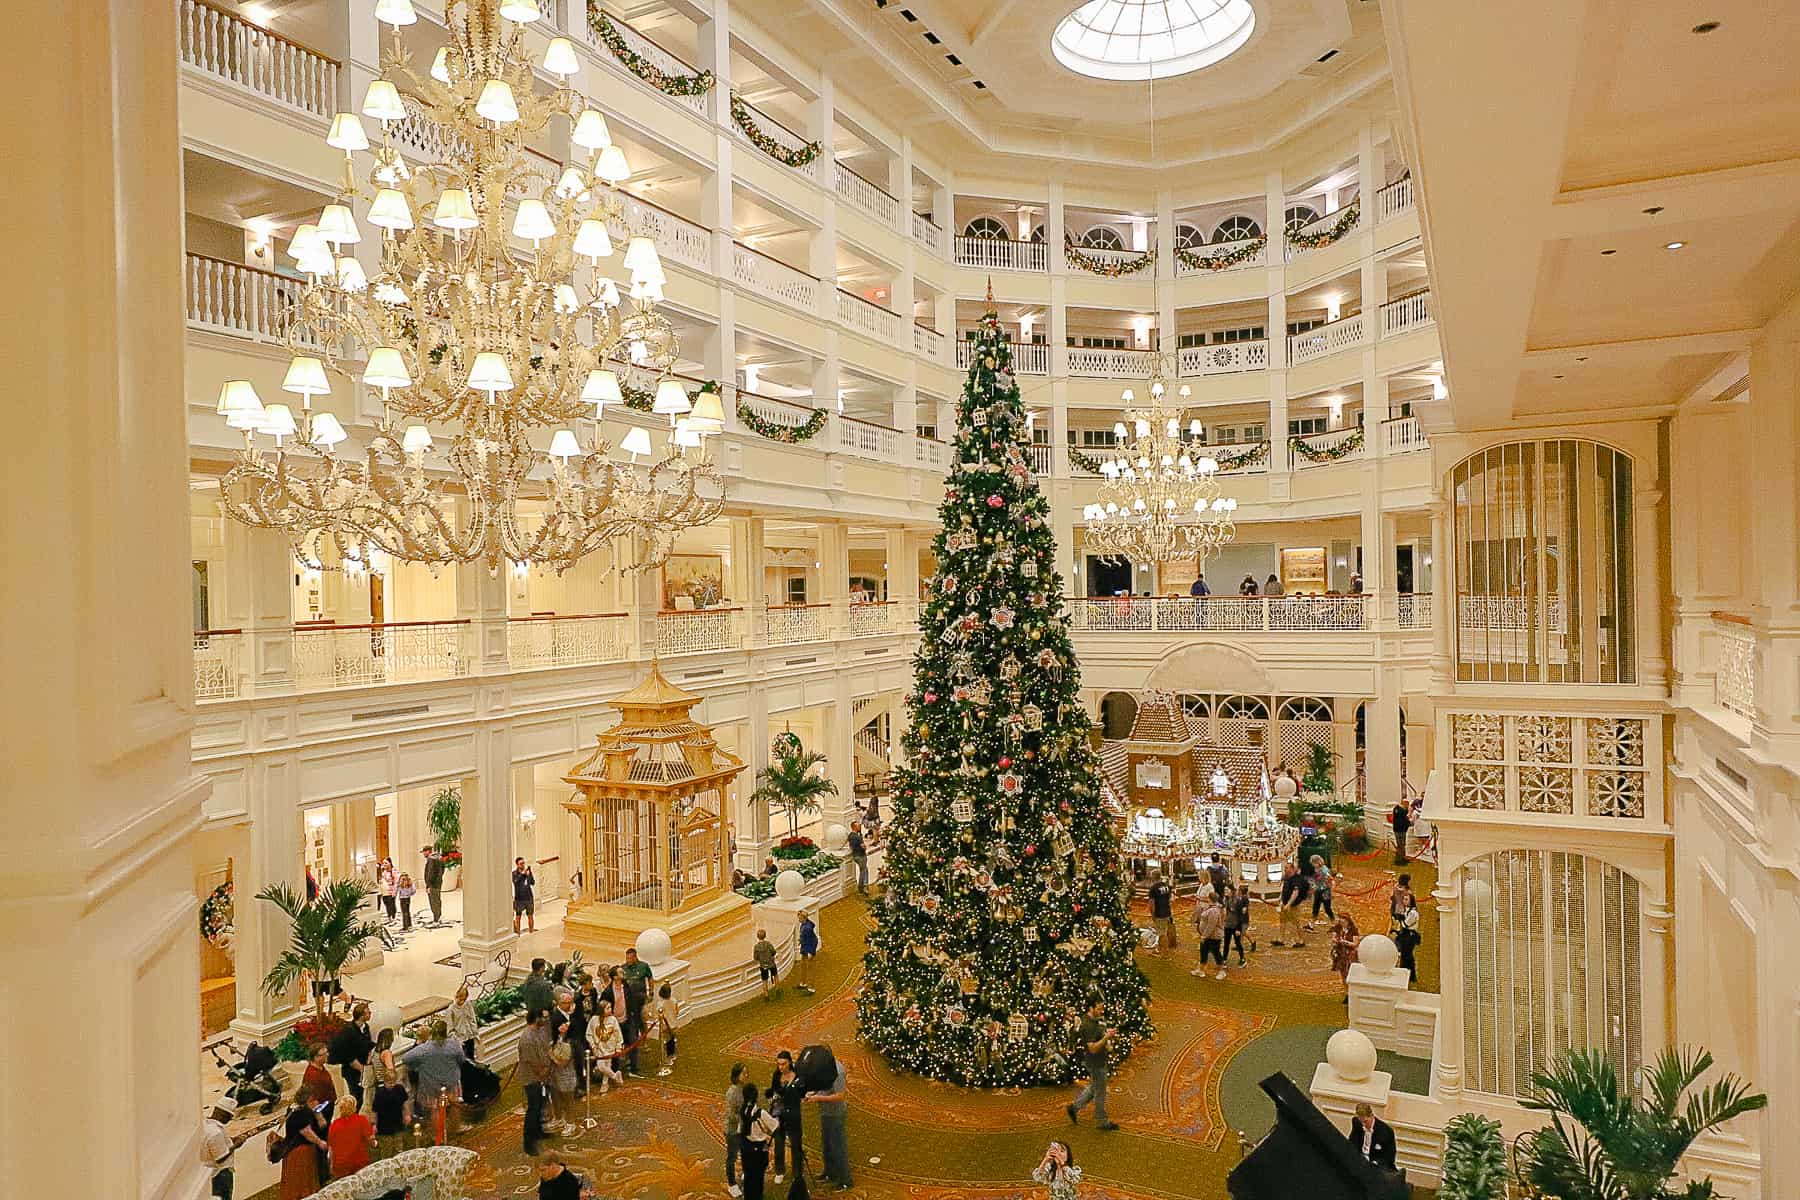 The Christmas Tree in the lobby of Grand Floridian stands several stories tall. 